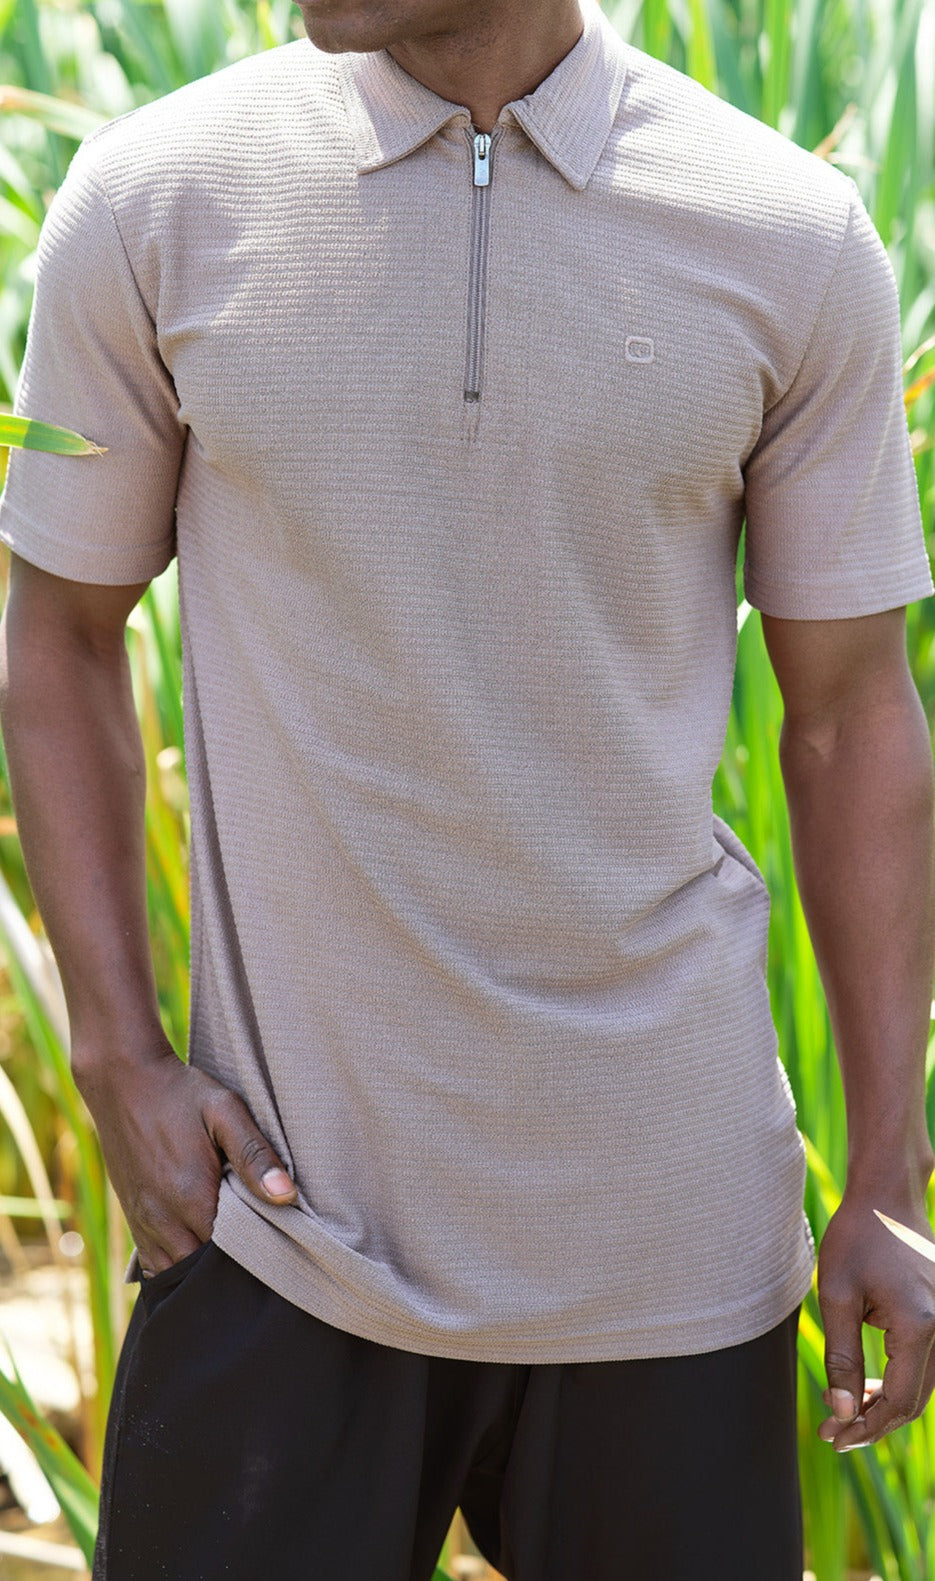  QL Relaxed Polo Zip Up S24 in Camel - QABA'IL,